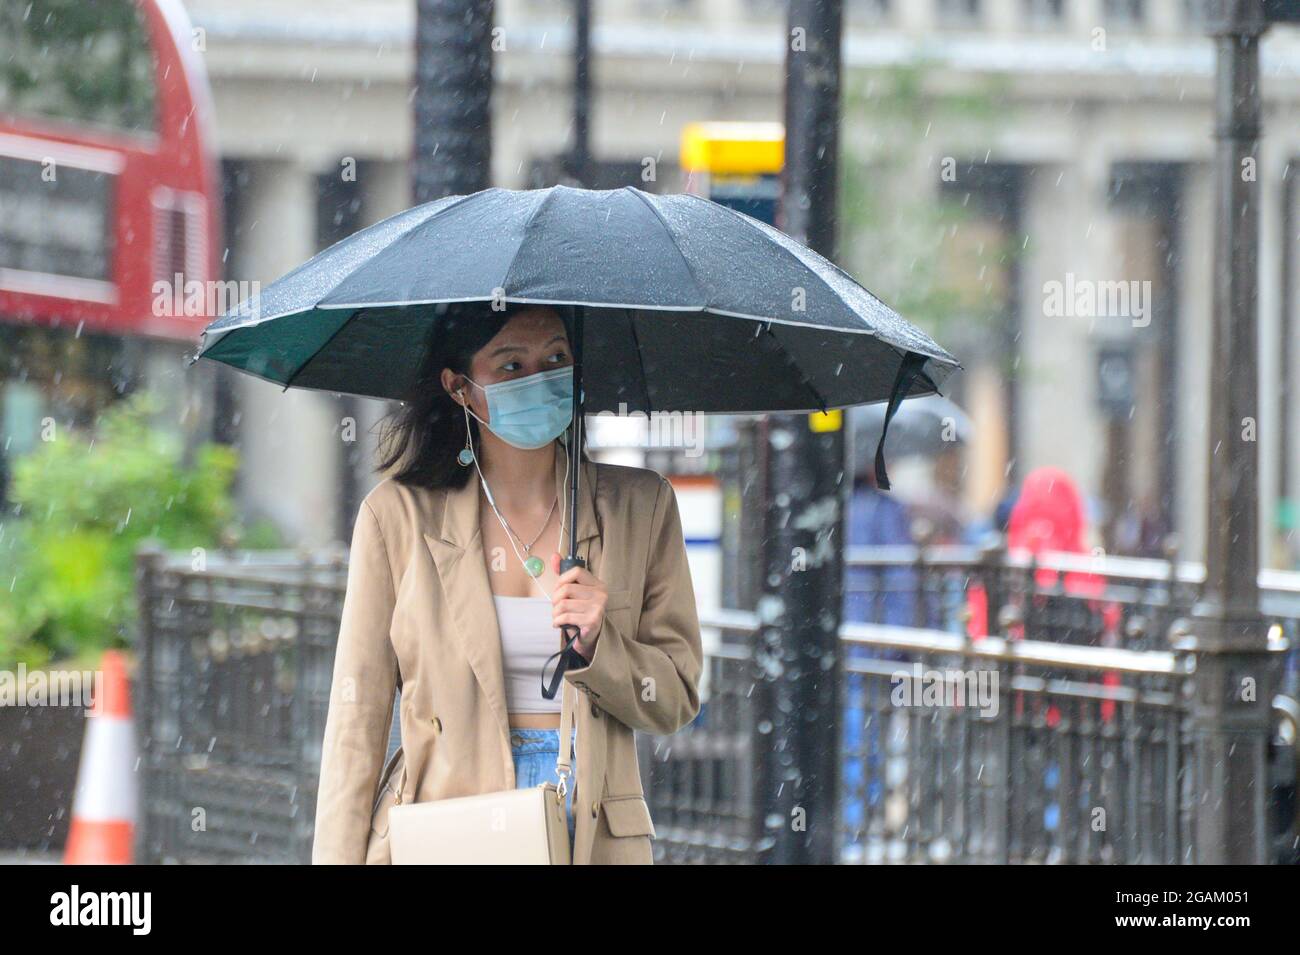 more rainy weather from London Stock Photo